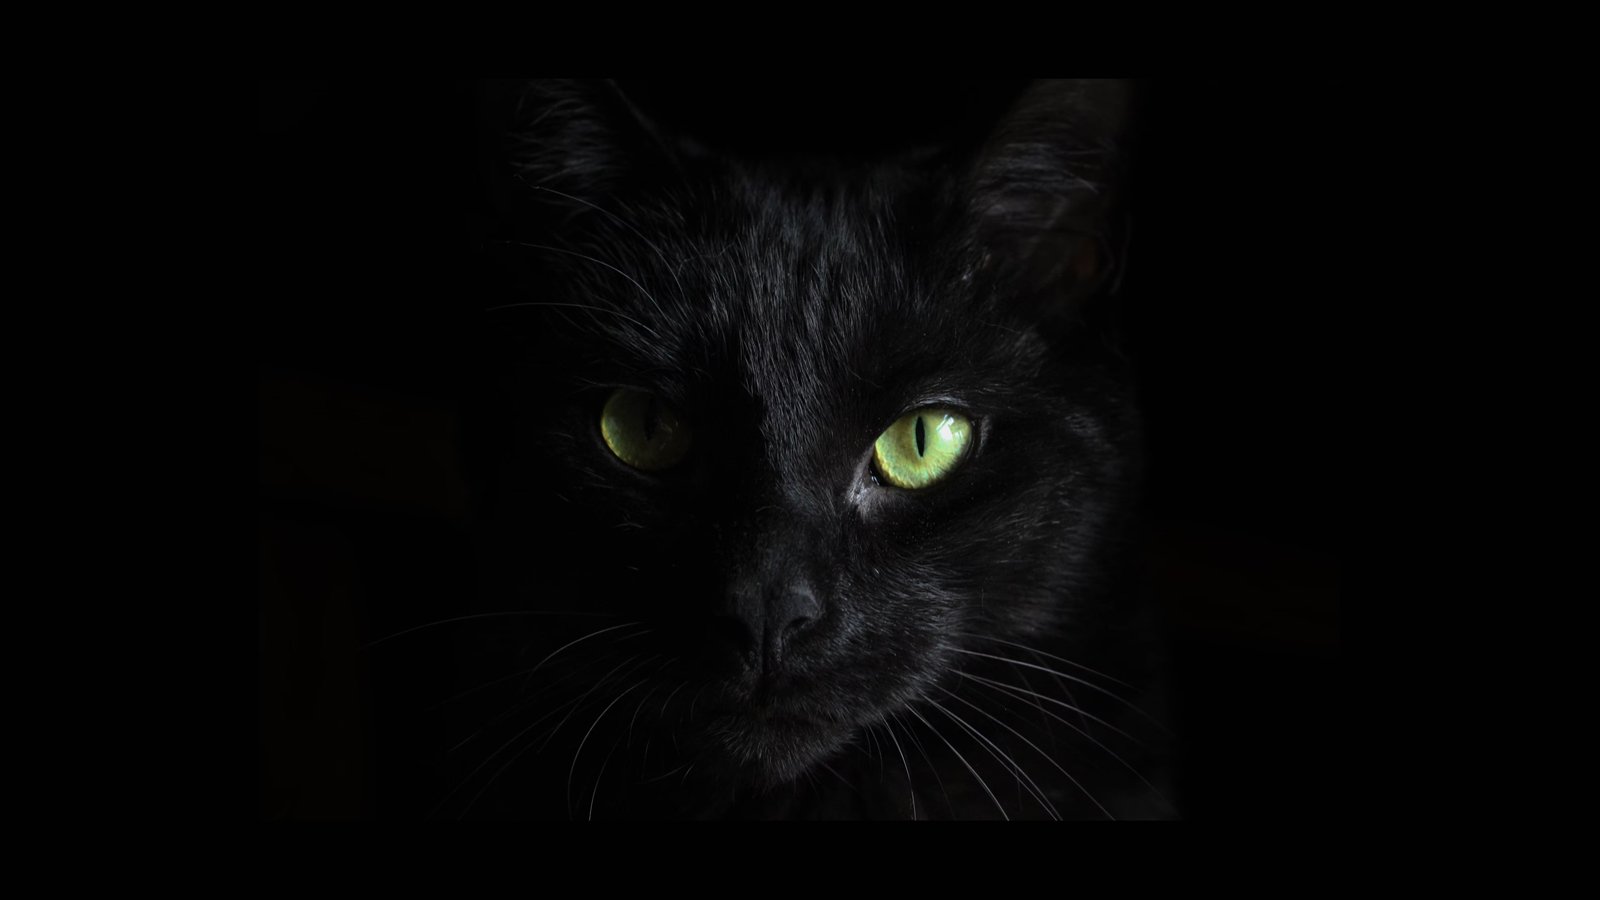 IT Consulting for Cloud Integration in a dark setting with a black cat and green eyes.